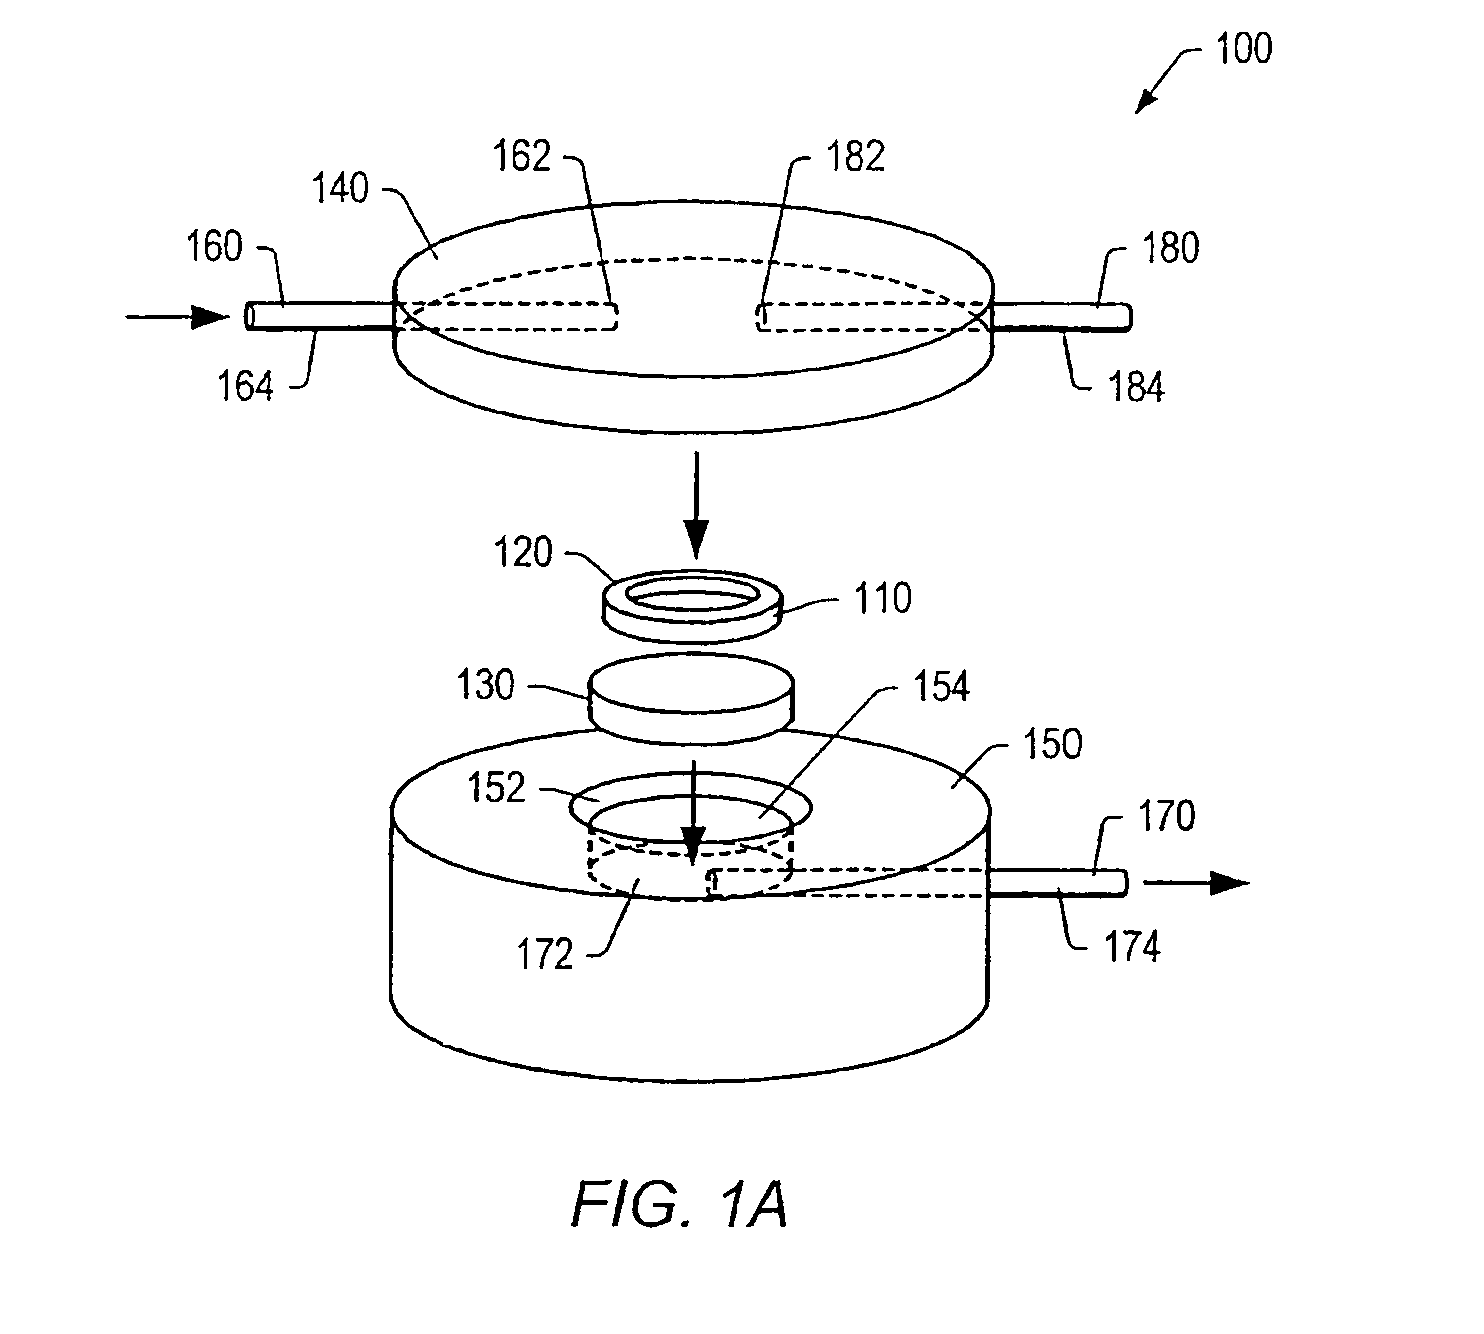 Integration of fluids and reagents into self-contained cartridges containing sensor elements and reagent delivery systems